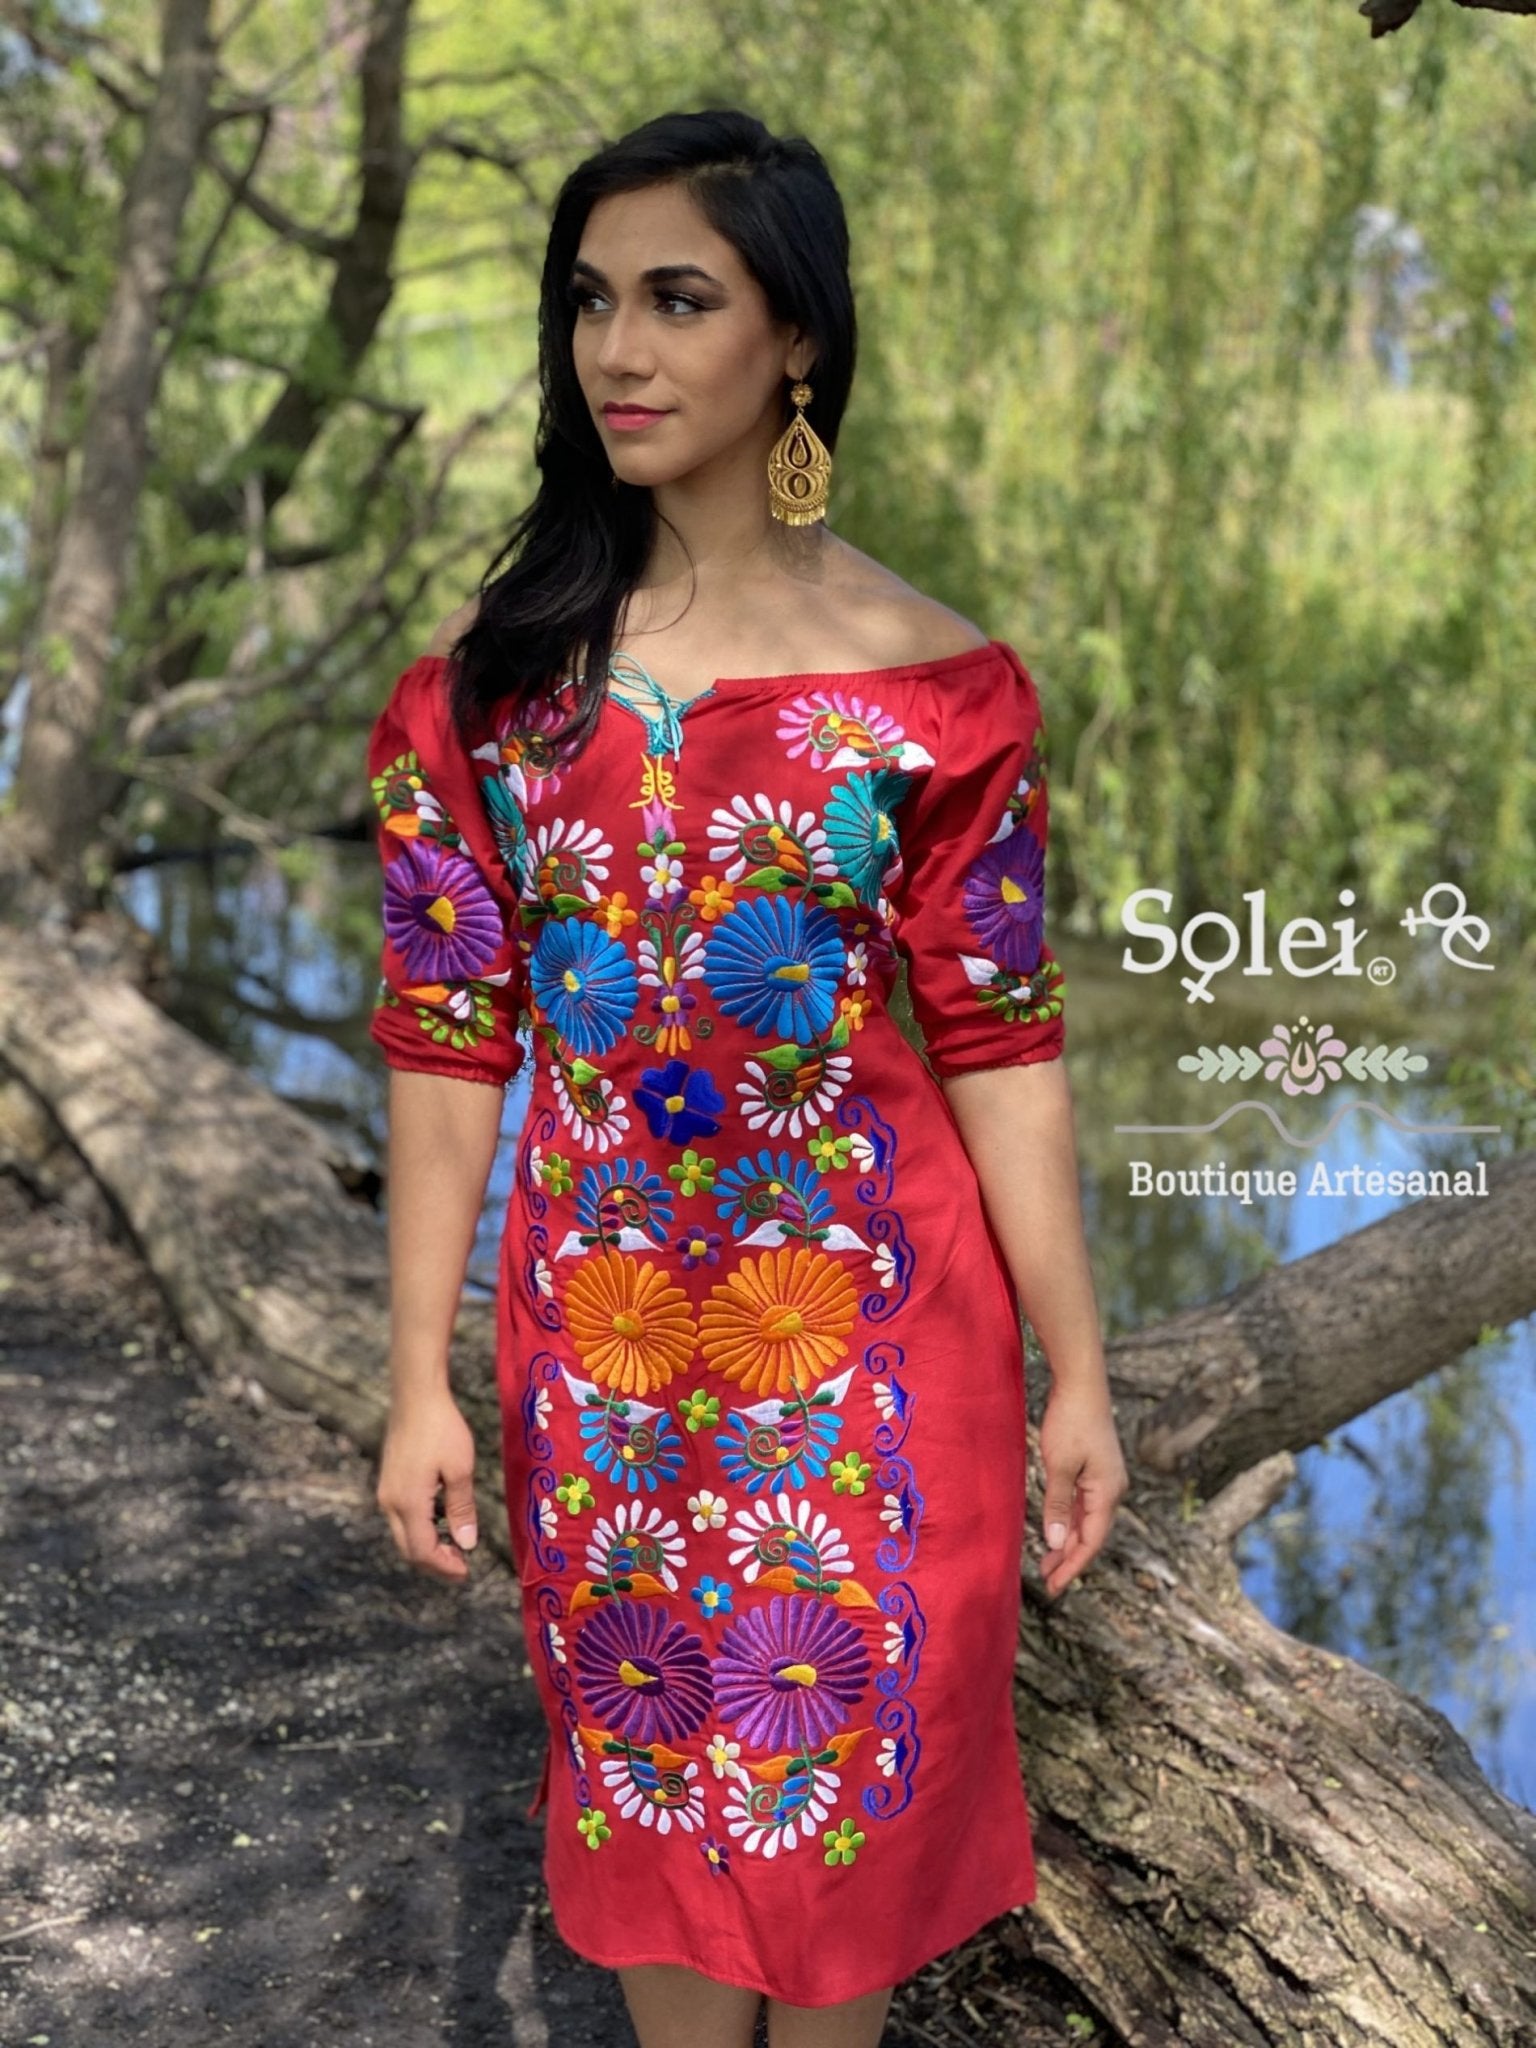 Front Tie Floral Dress. Mexican Floral Dress. Beautiful Embroidered Dress. - Solei Store